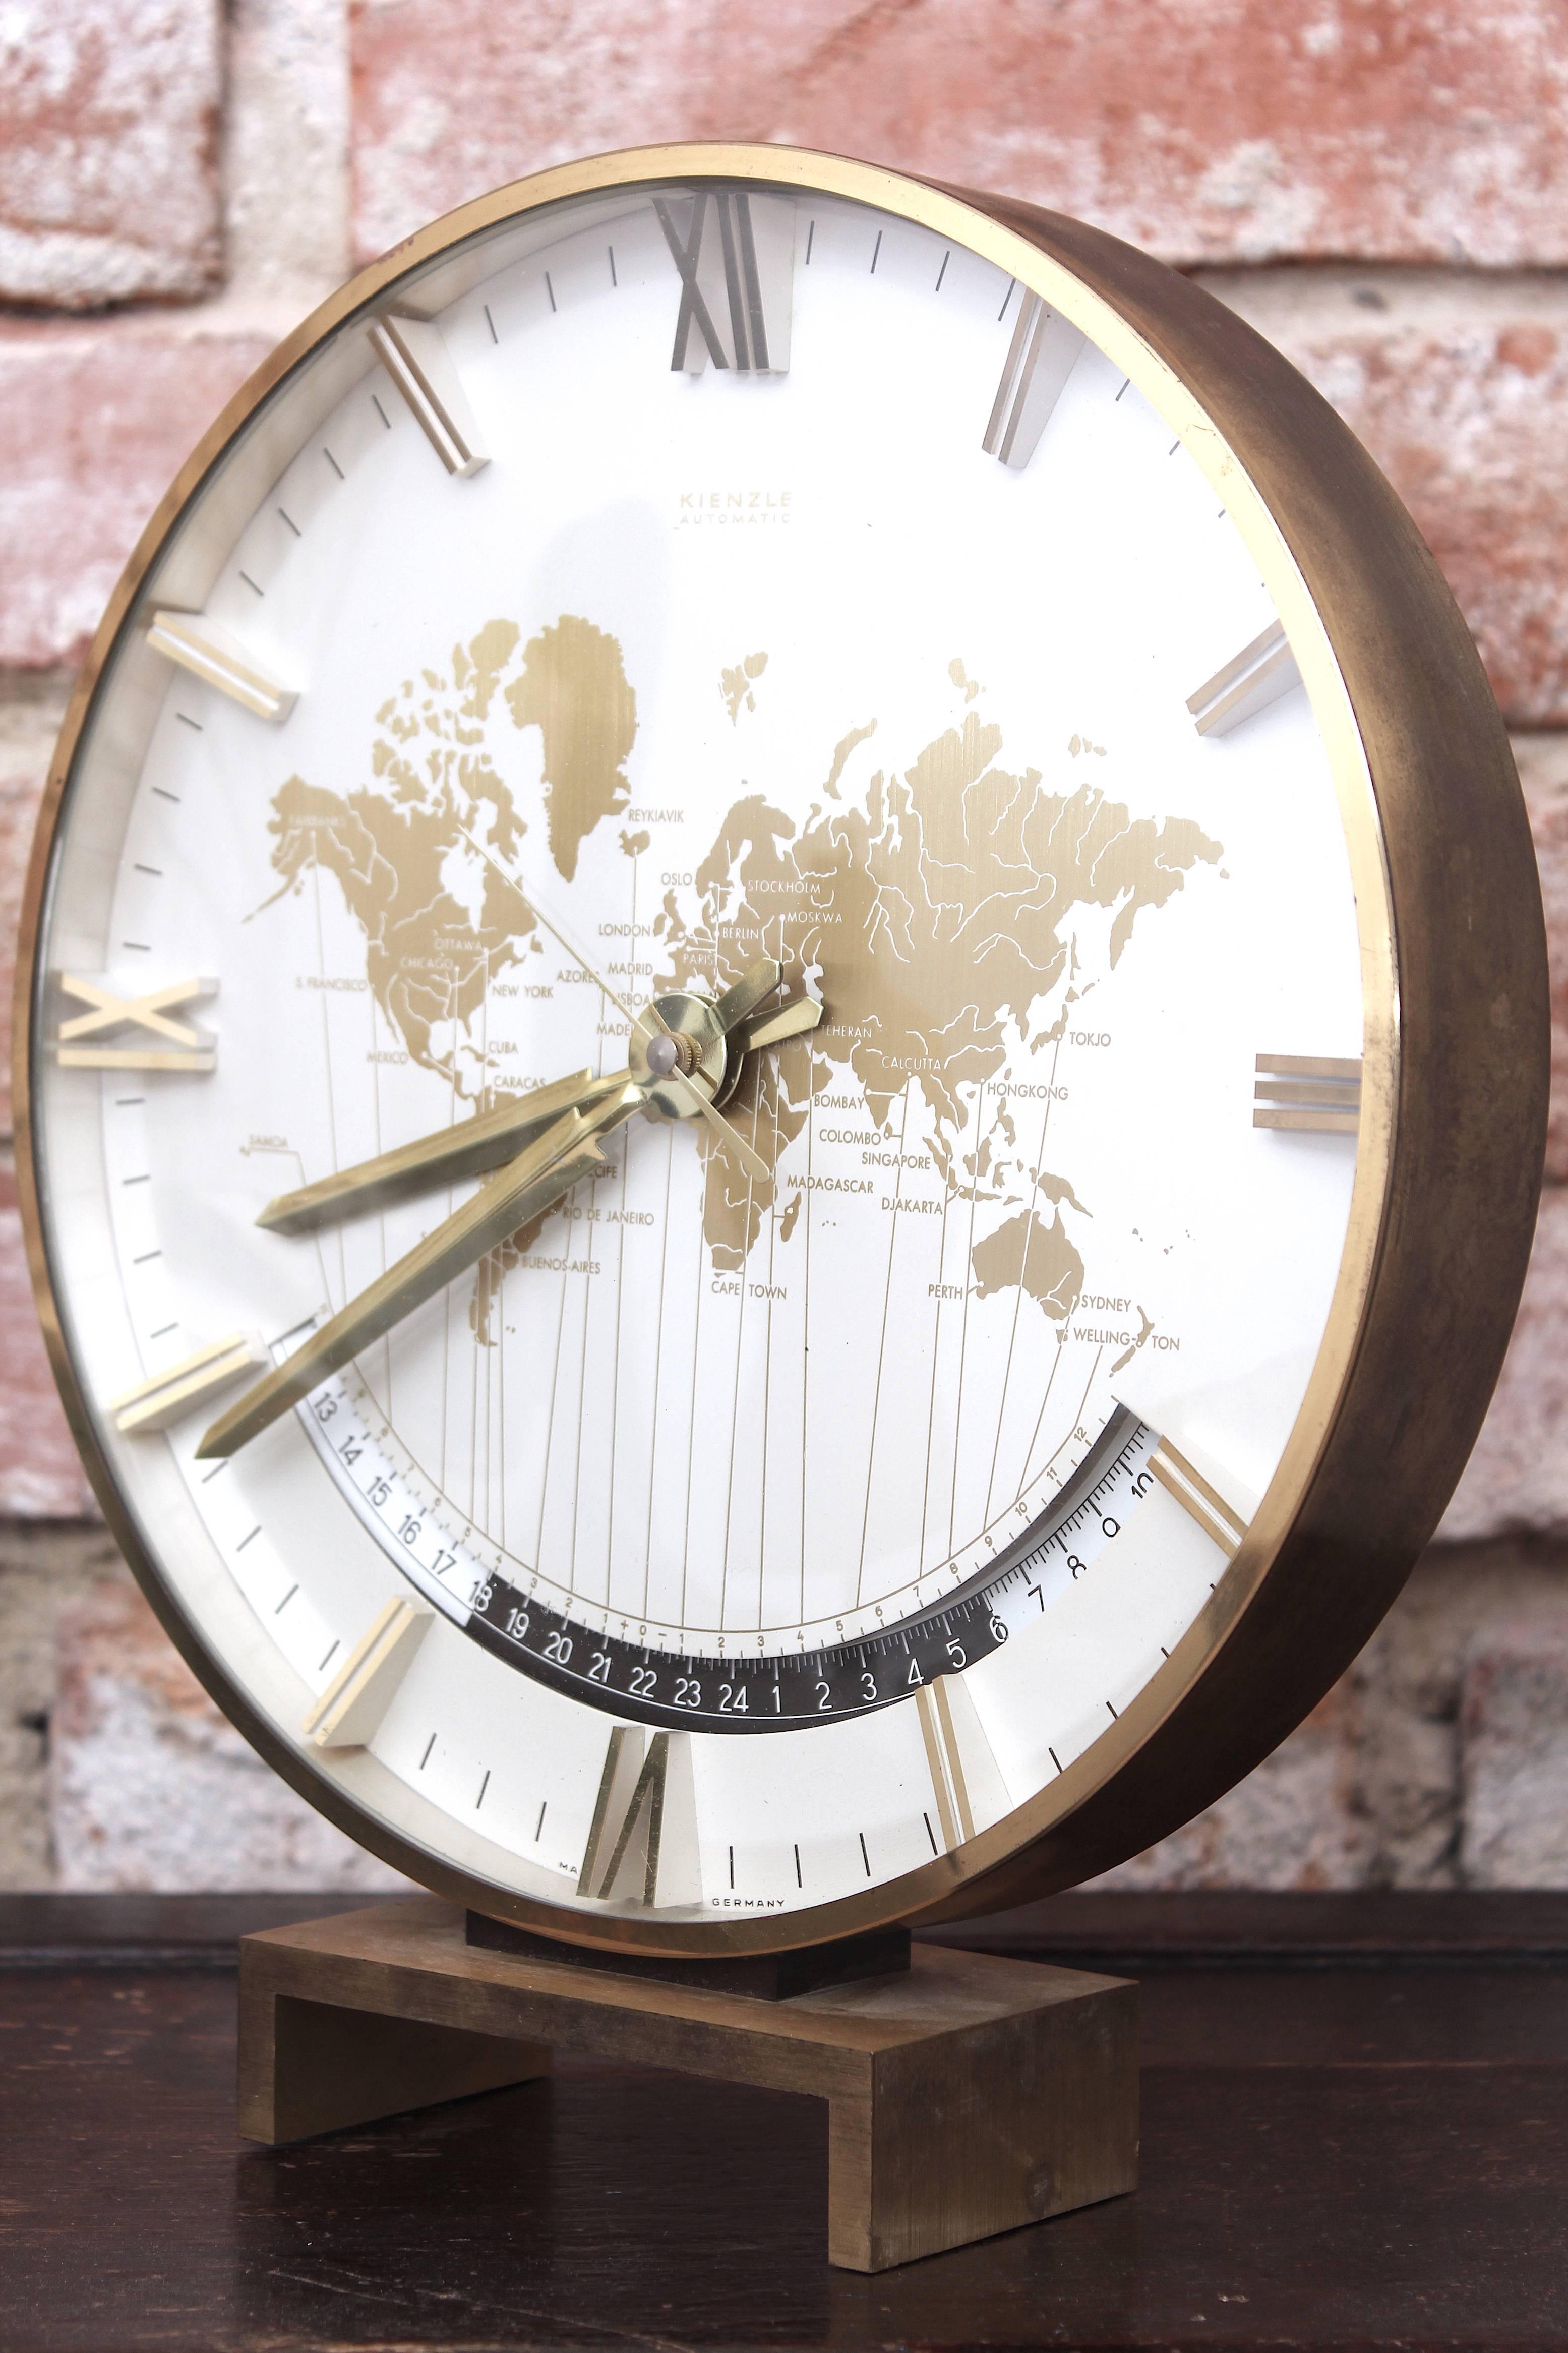 This automatic World Time Zones Table Clock was manufactured by Kienzle (Kienzle Uhren GmbH is Germany's oldest watchmakers, founded in 1822 in Schwenningen ) and features a crystal glass cover with solid brass elements. The clock measures 26 cm in